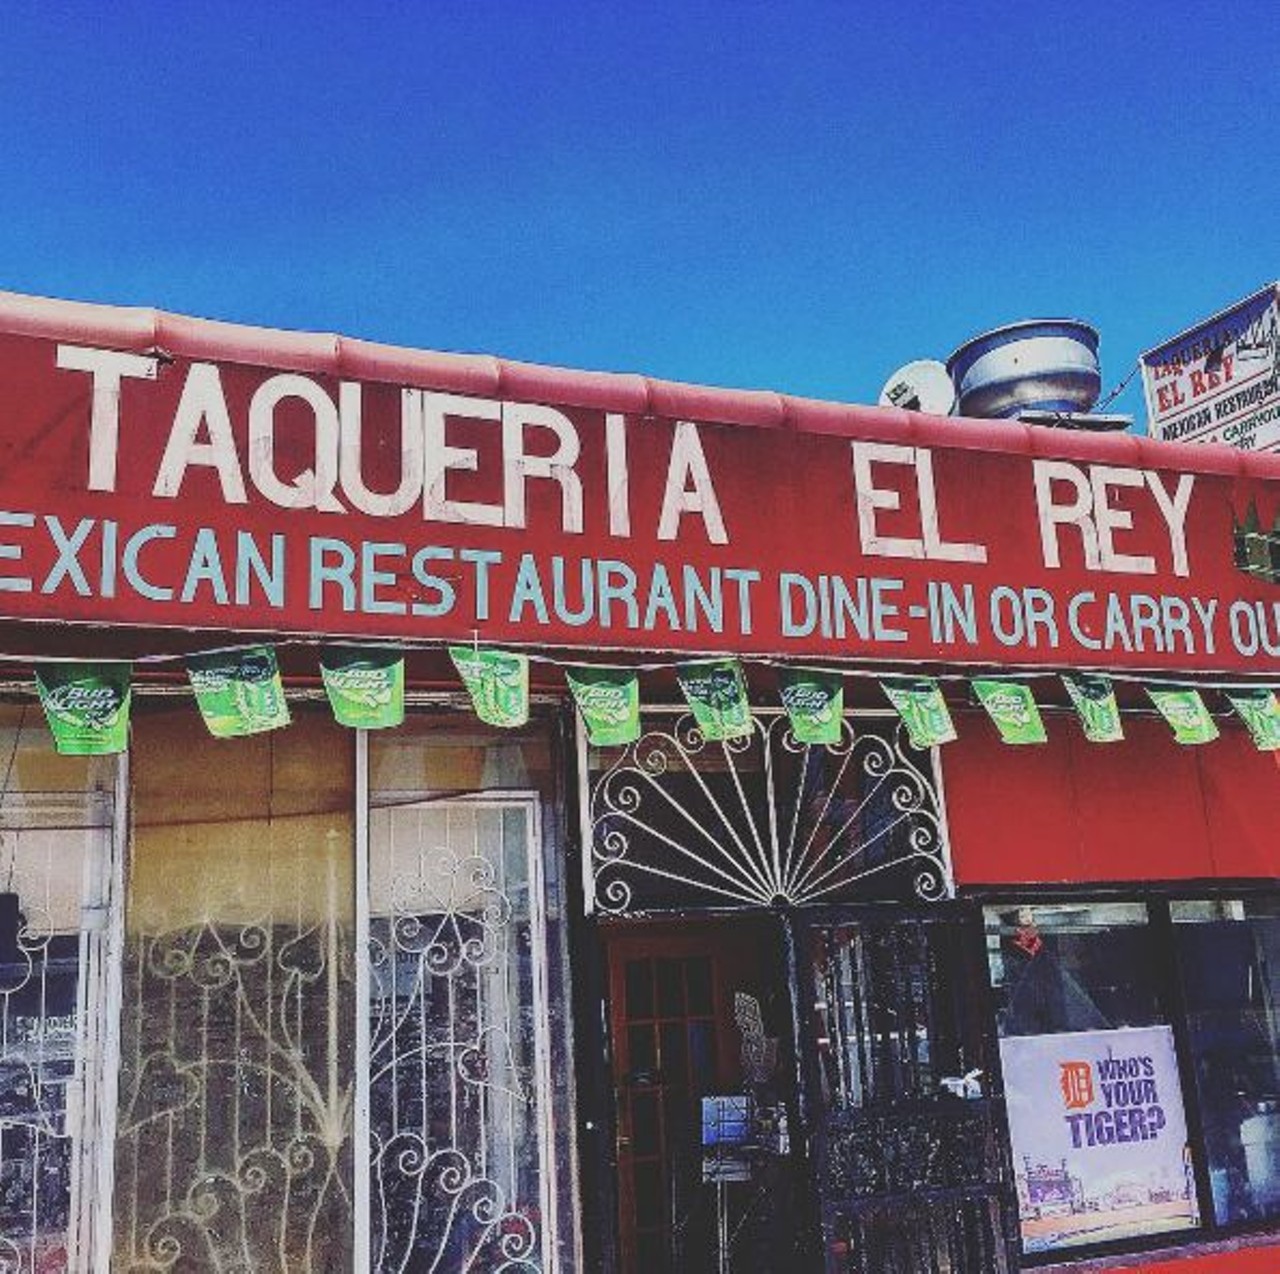 Taqueria El Rey
4730 Vernor Hwy, Detroit, MI 48209
(313) 357-3094
Another Mexicantown joint that is as authentic as it gets. 